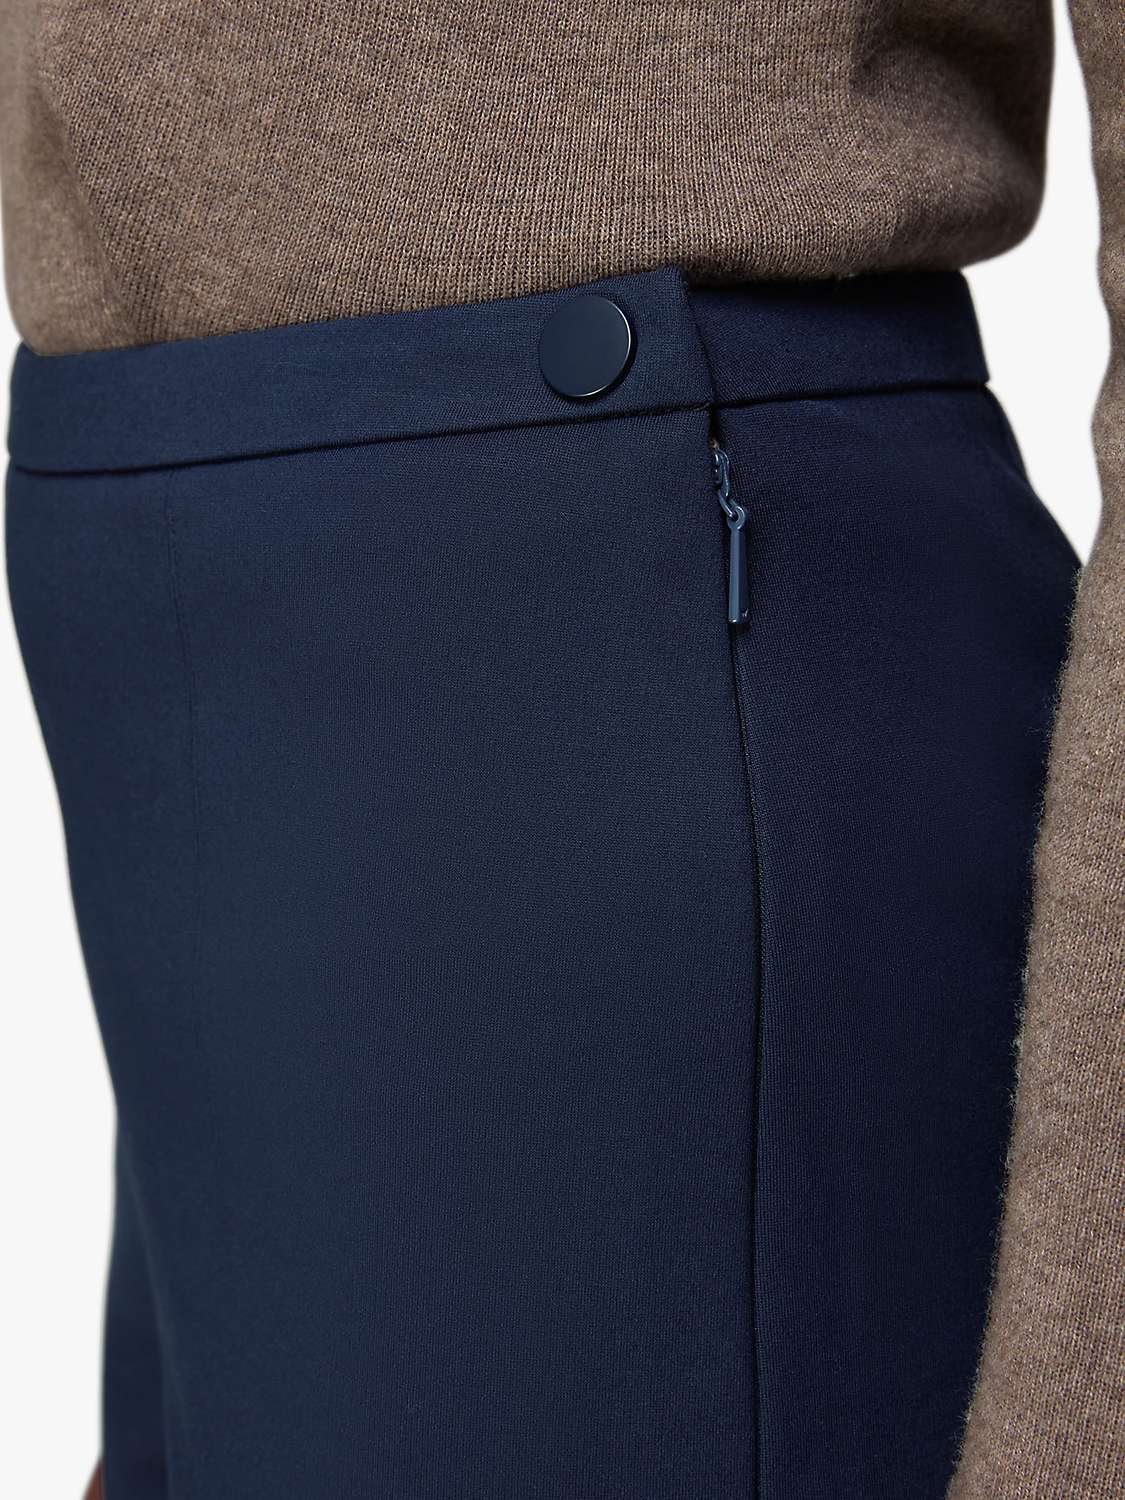 Buy Whistles Camilla Wide Leg Trousers Online at johnlewis.com